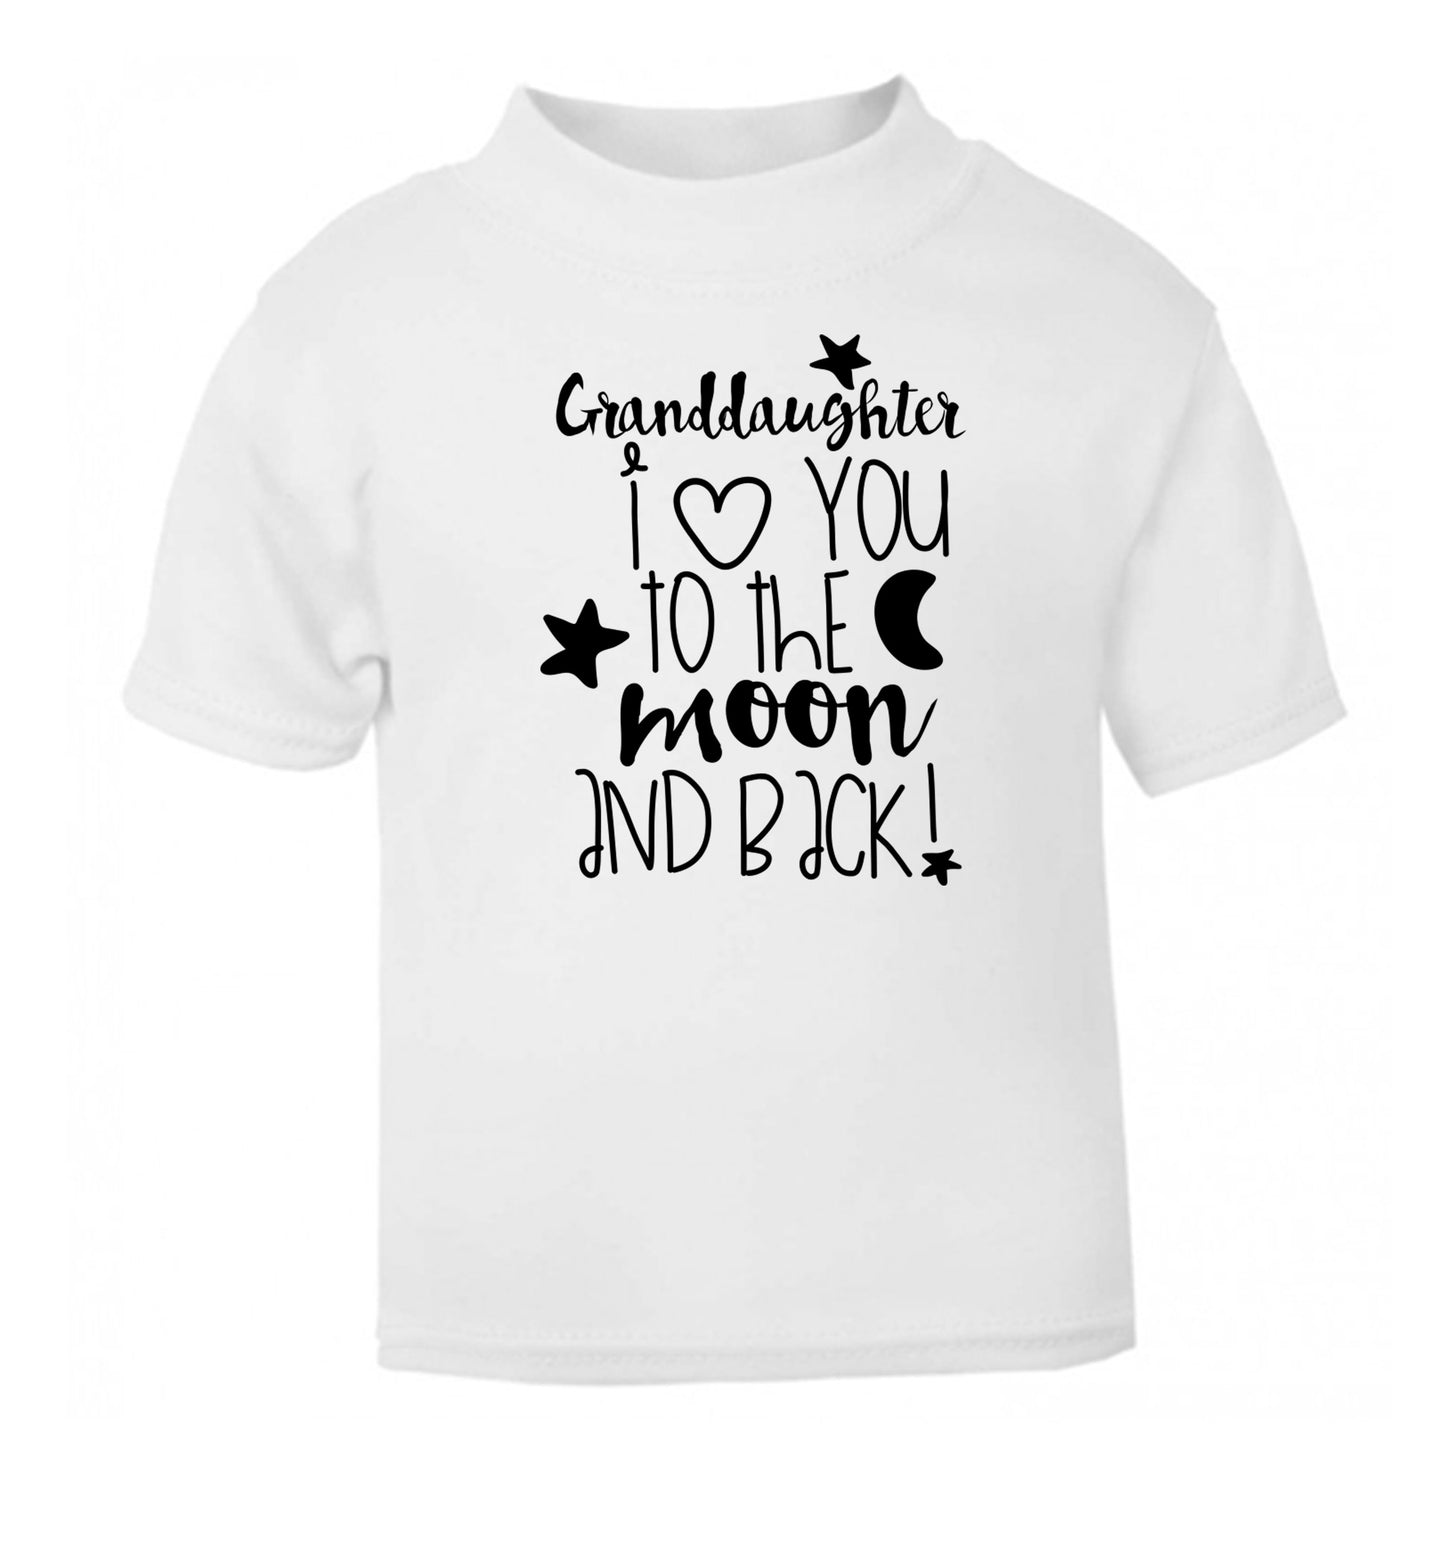 Granddaughter I love you to the moon and back white Baby Toddler Tshirt 2 Years